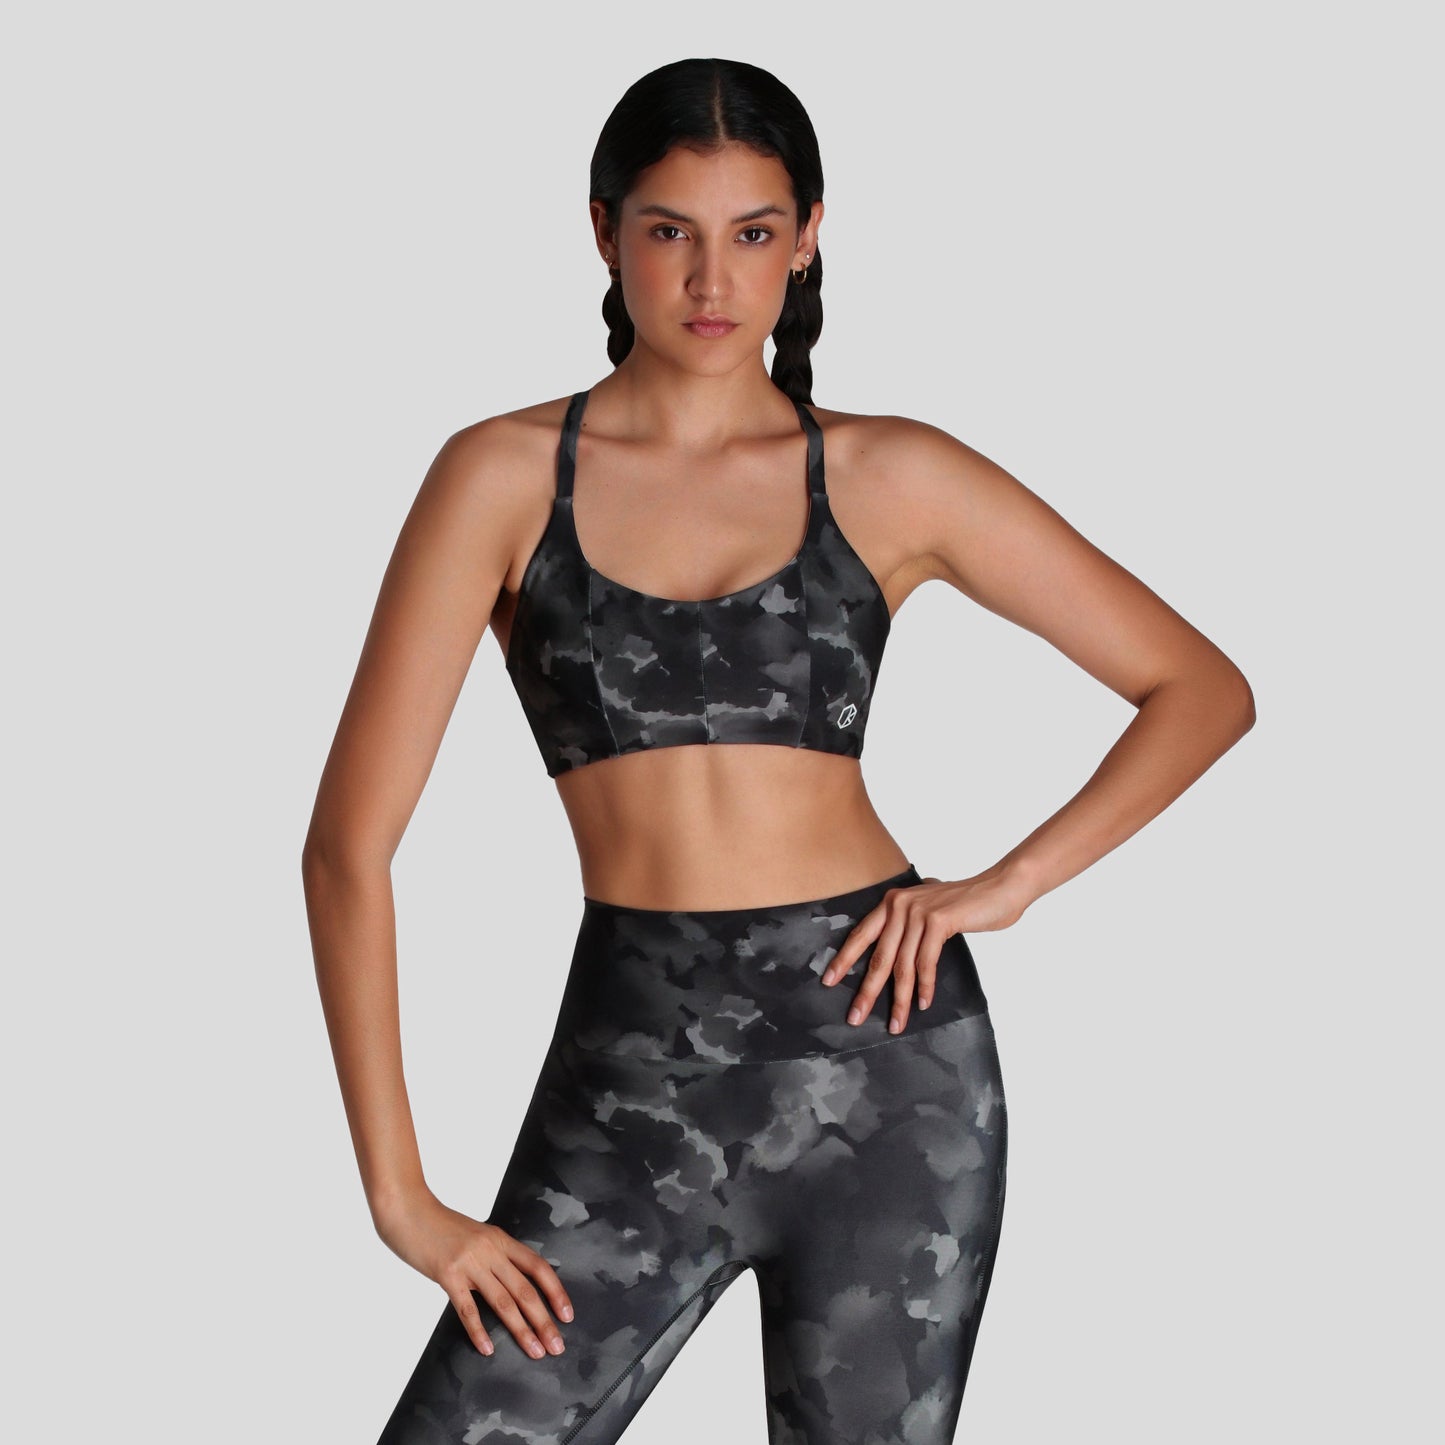 Printed Top for exercising